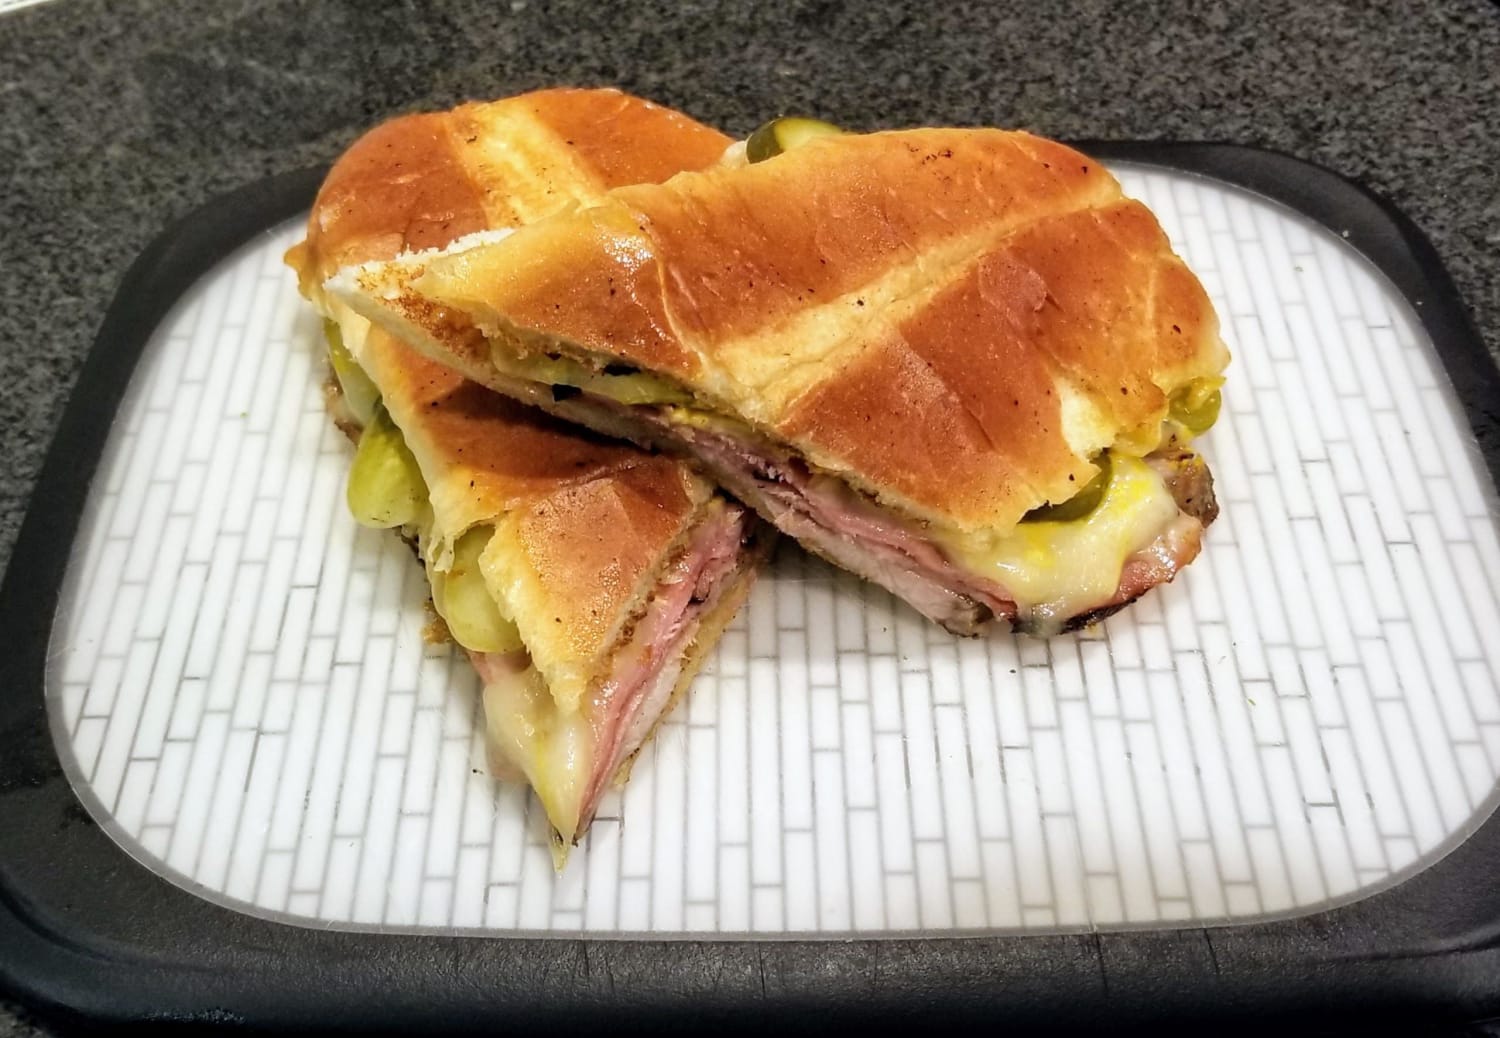 I used Kenji's plancha hack to make the Cubanos from chef, 10/10 would recommend